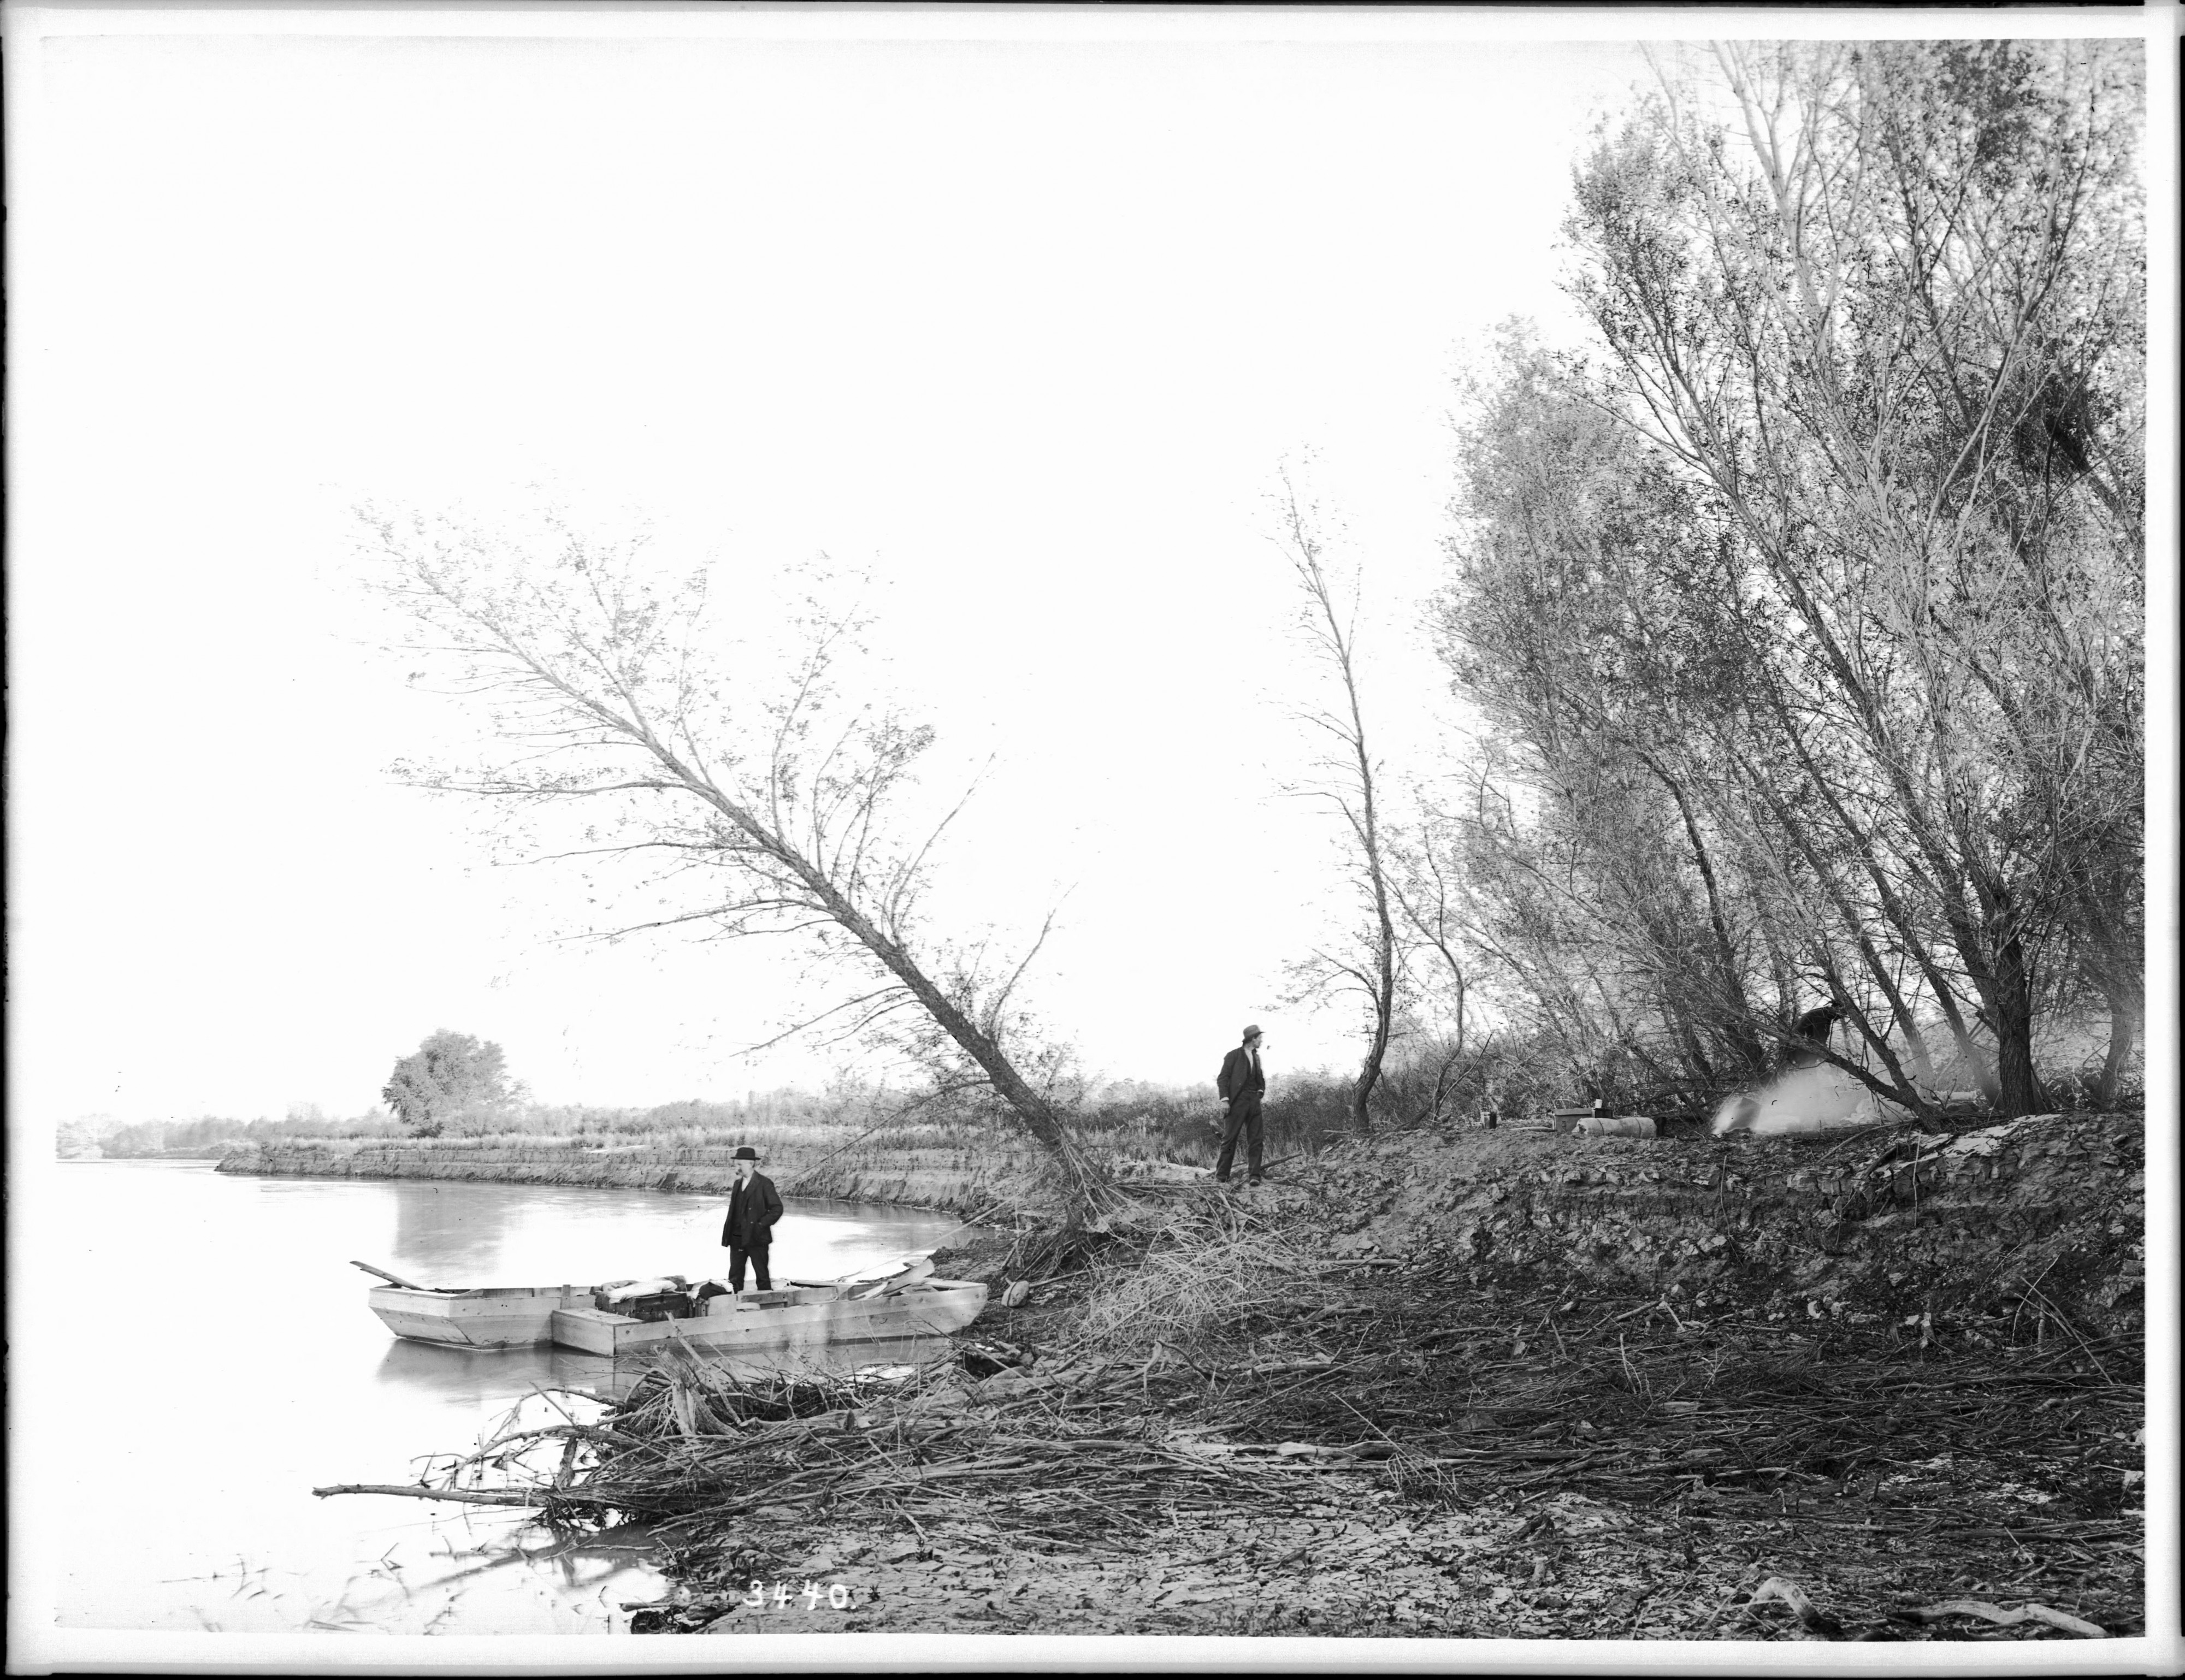 Small outboards landing to make camp on the shore of the Colorado River, ca.1900 (CHS-3440)